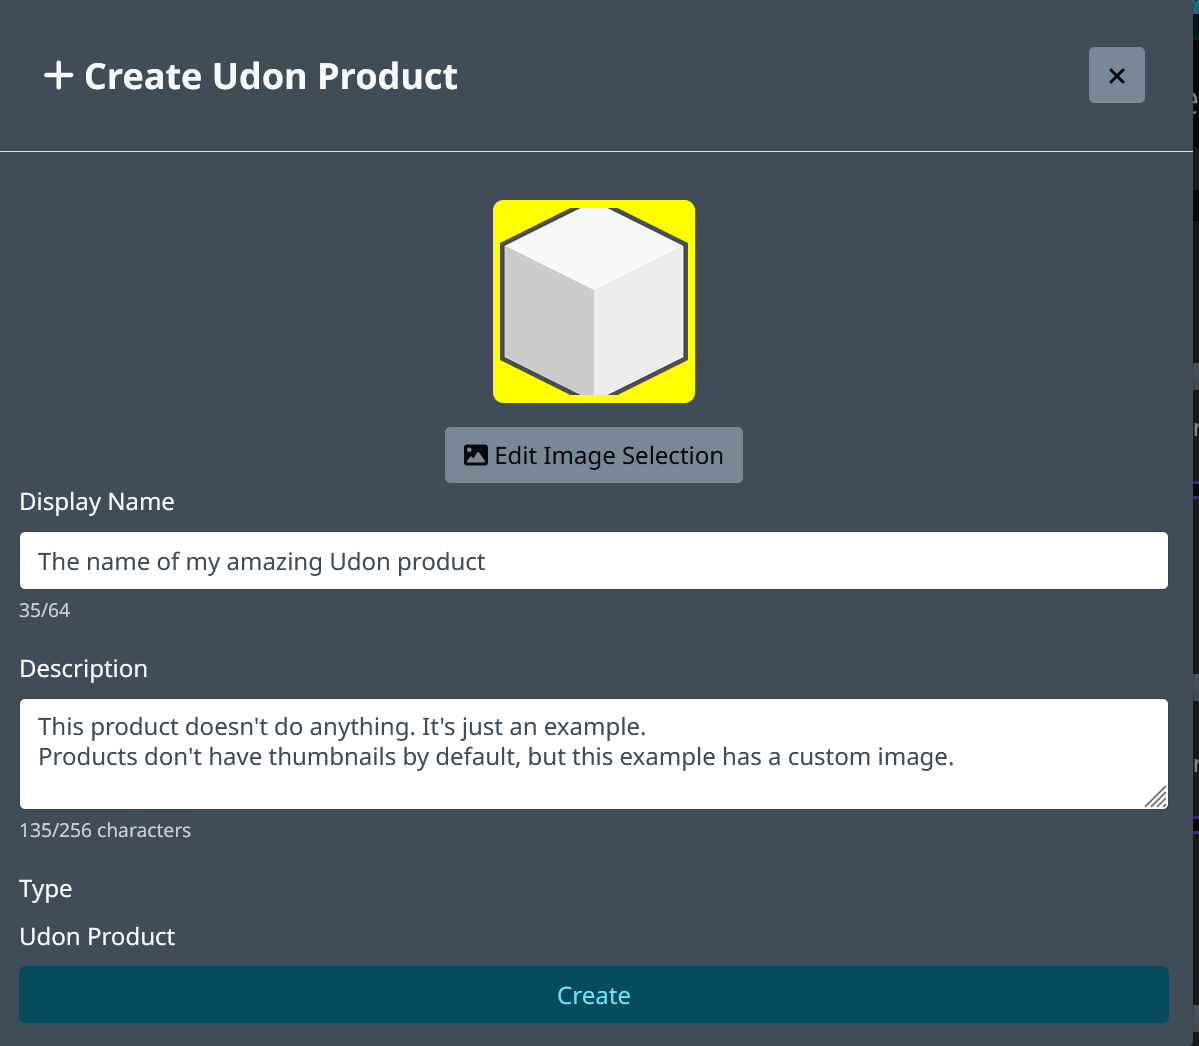 How to create Udon products on VRChat.com..